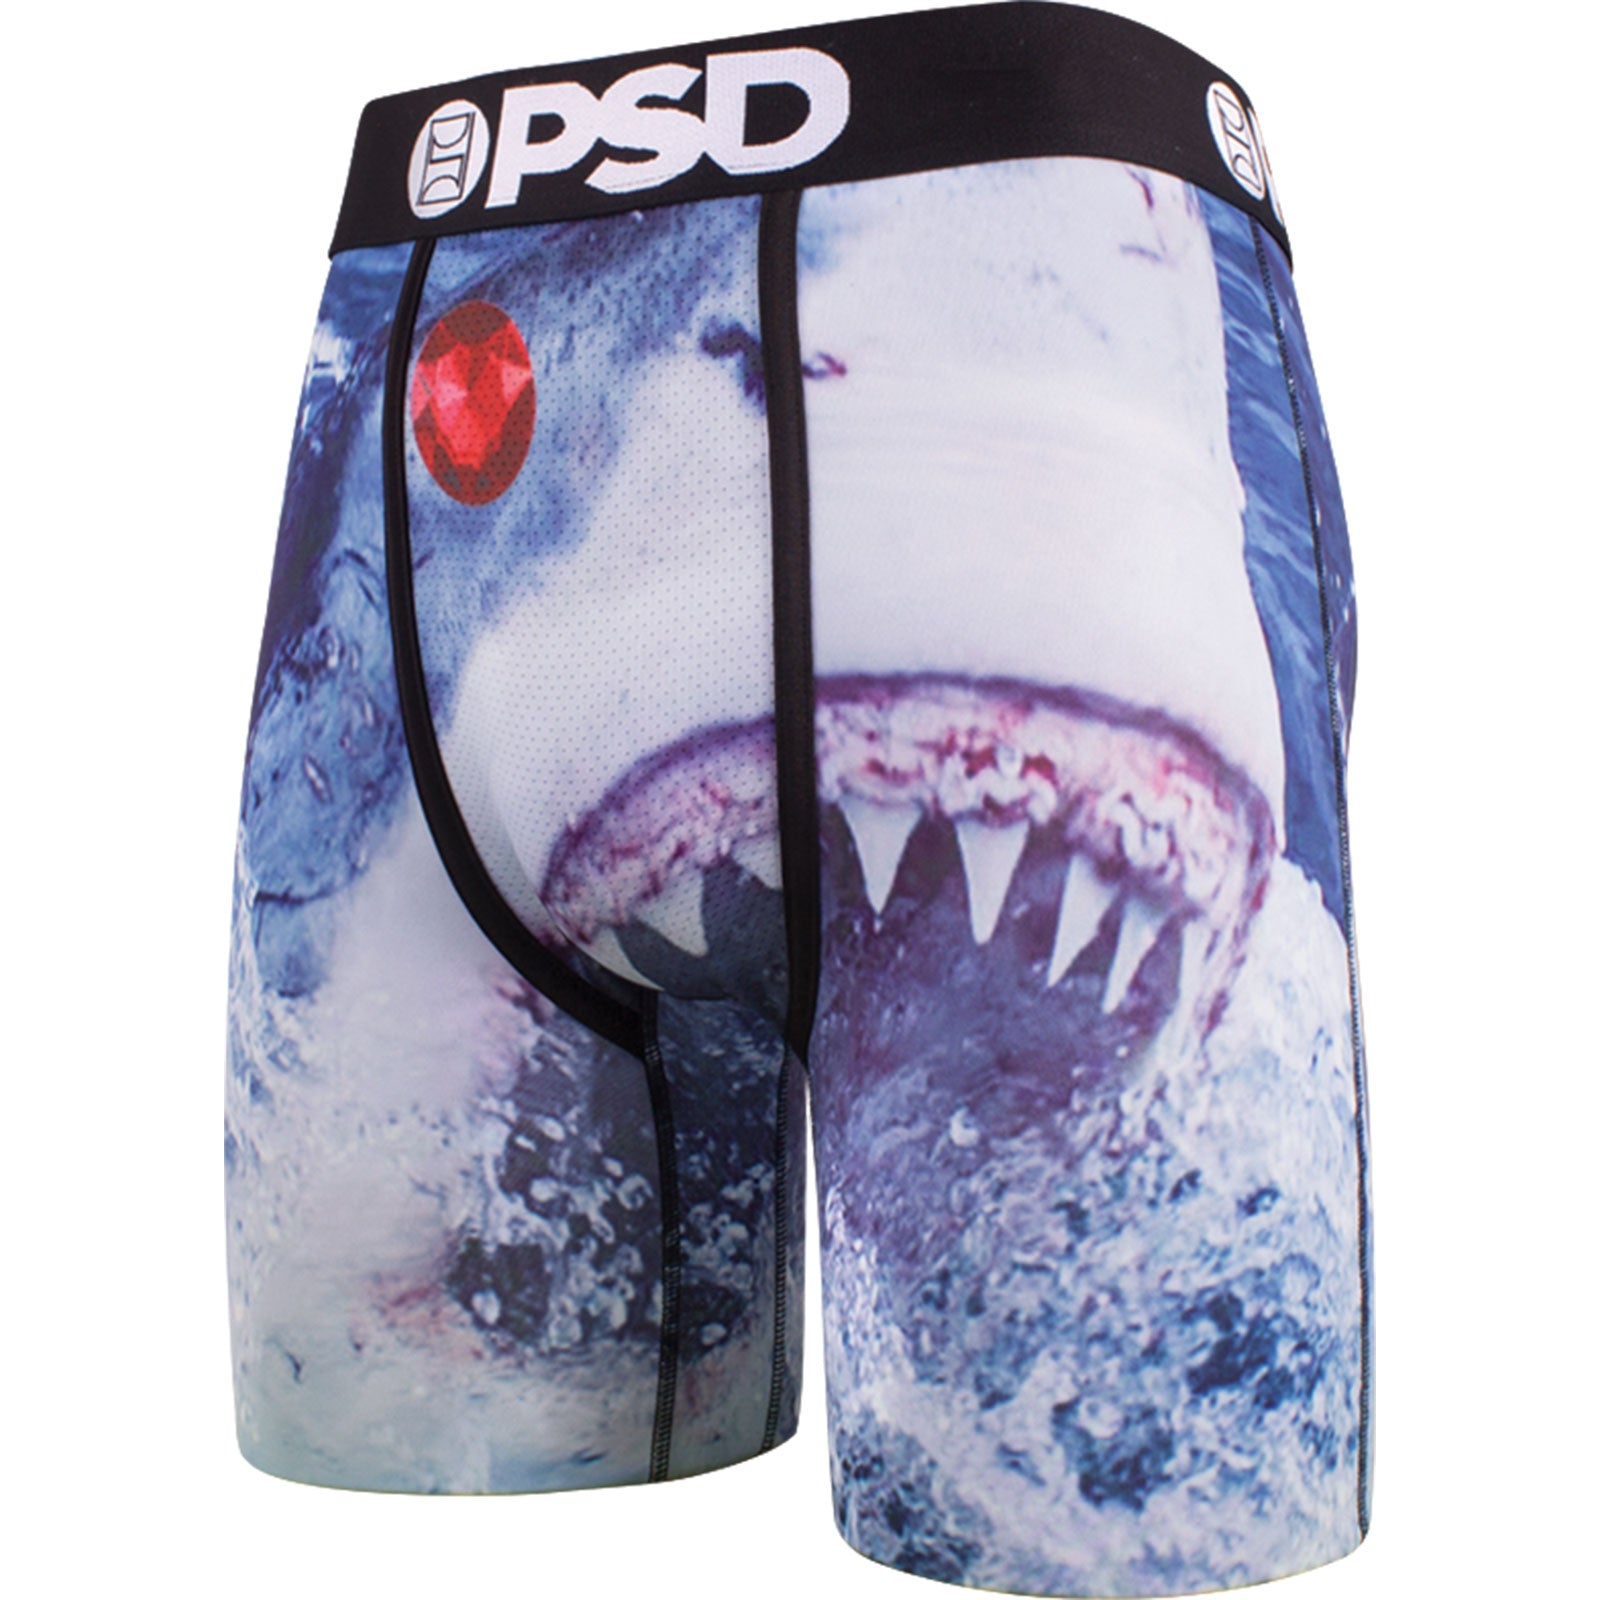 Category: Youth - PSD Underwear